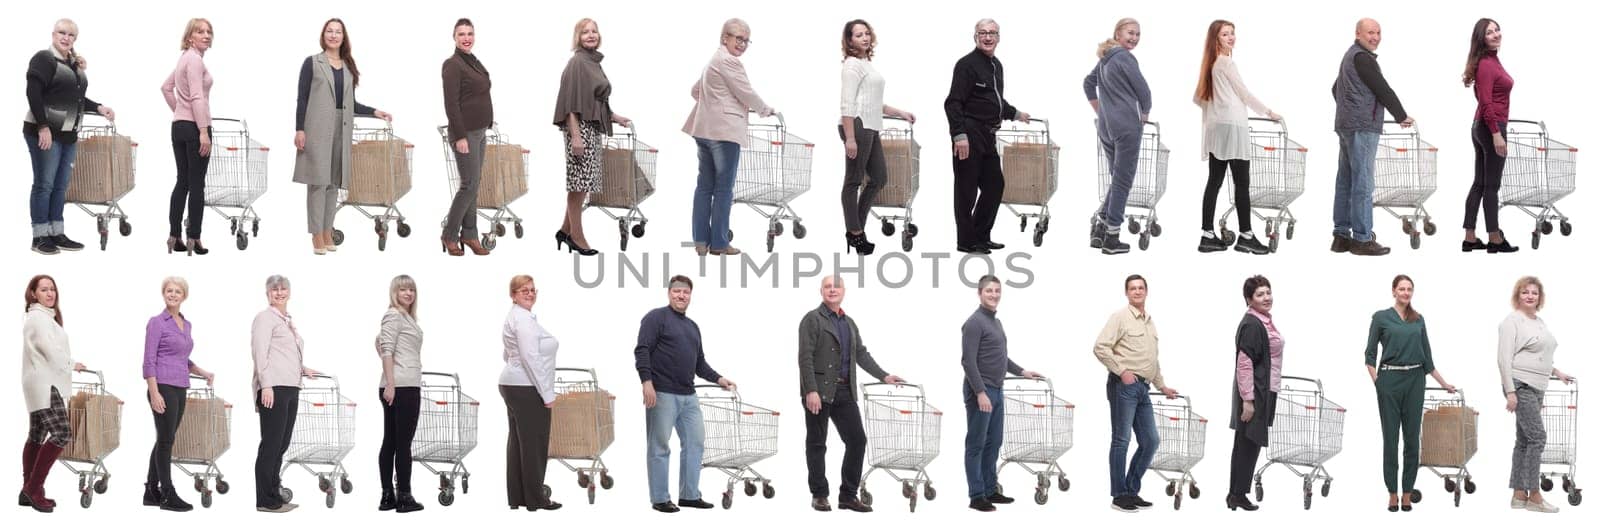 group of people with cart isolated on white background